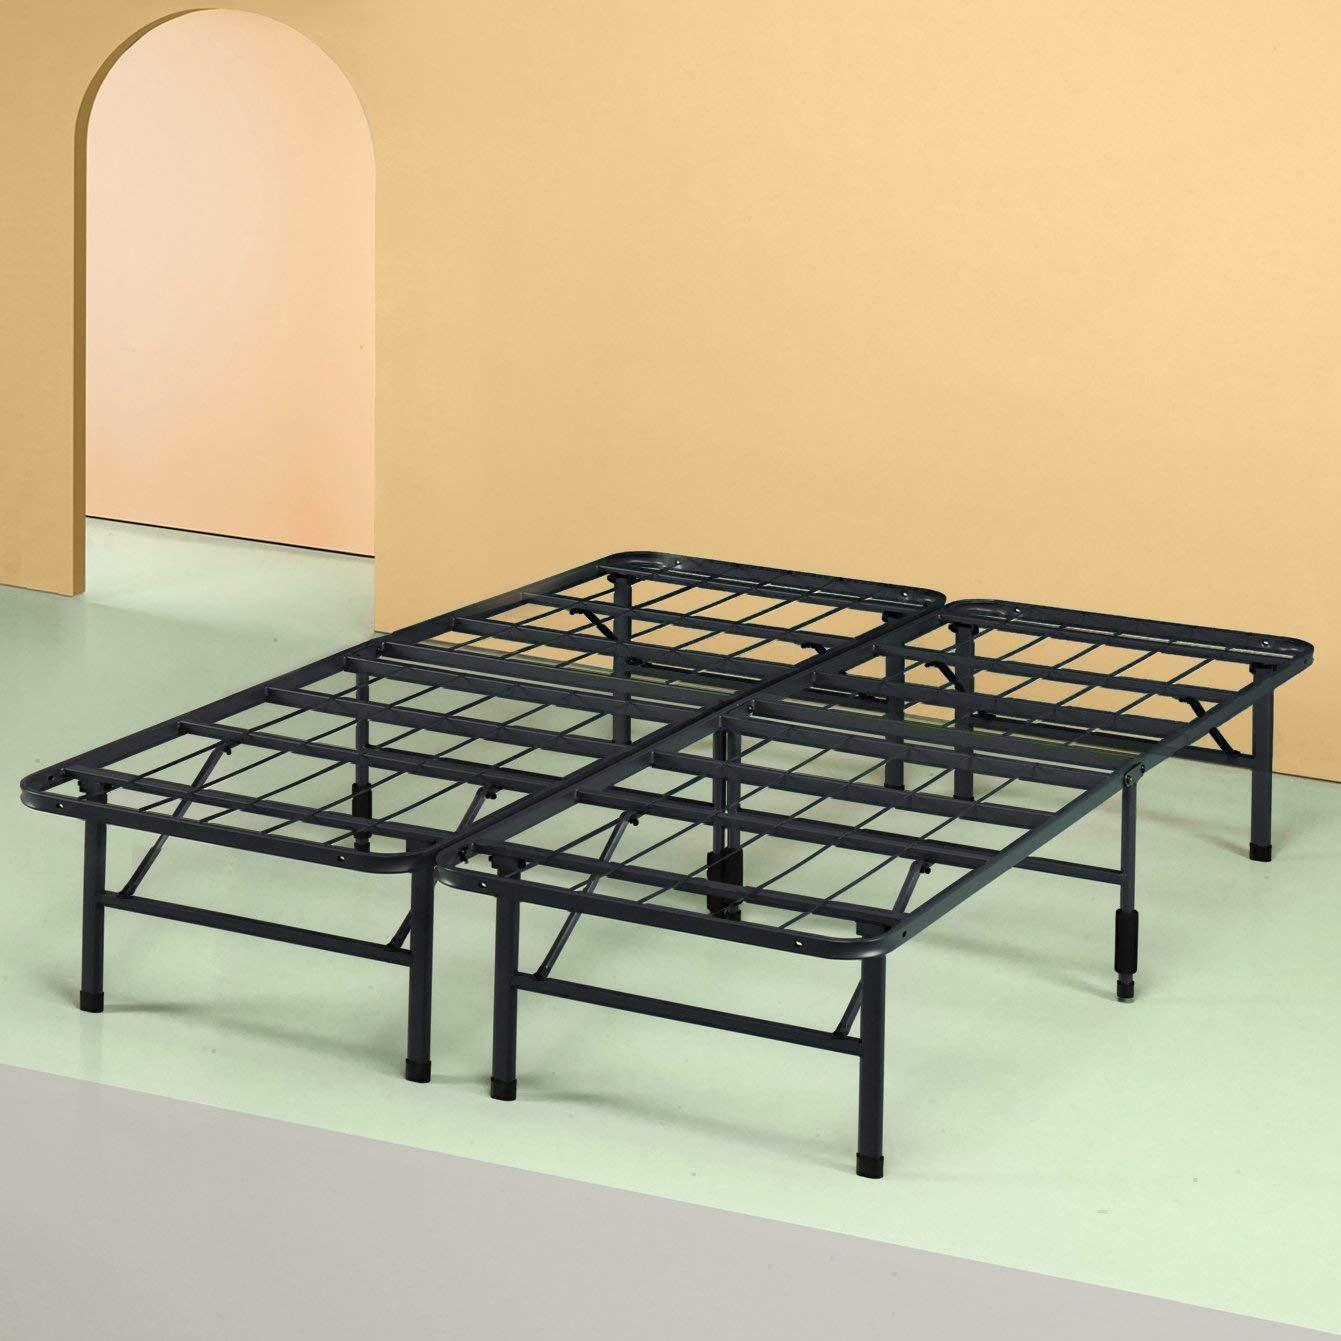 19 Best Metal Bed Frames 2022 The, How To Tighten A Metal Bed Frame